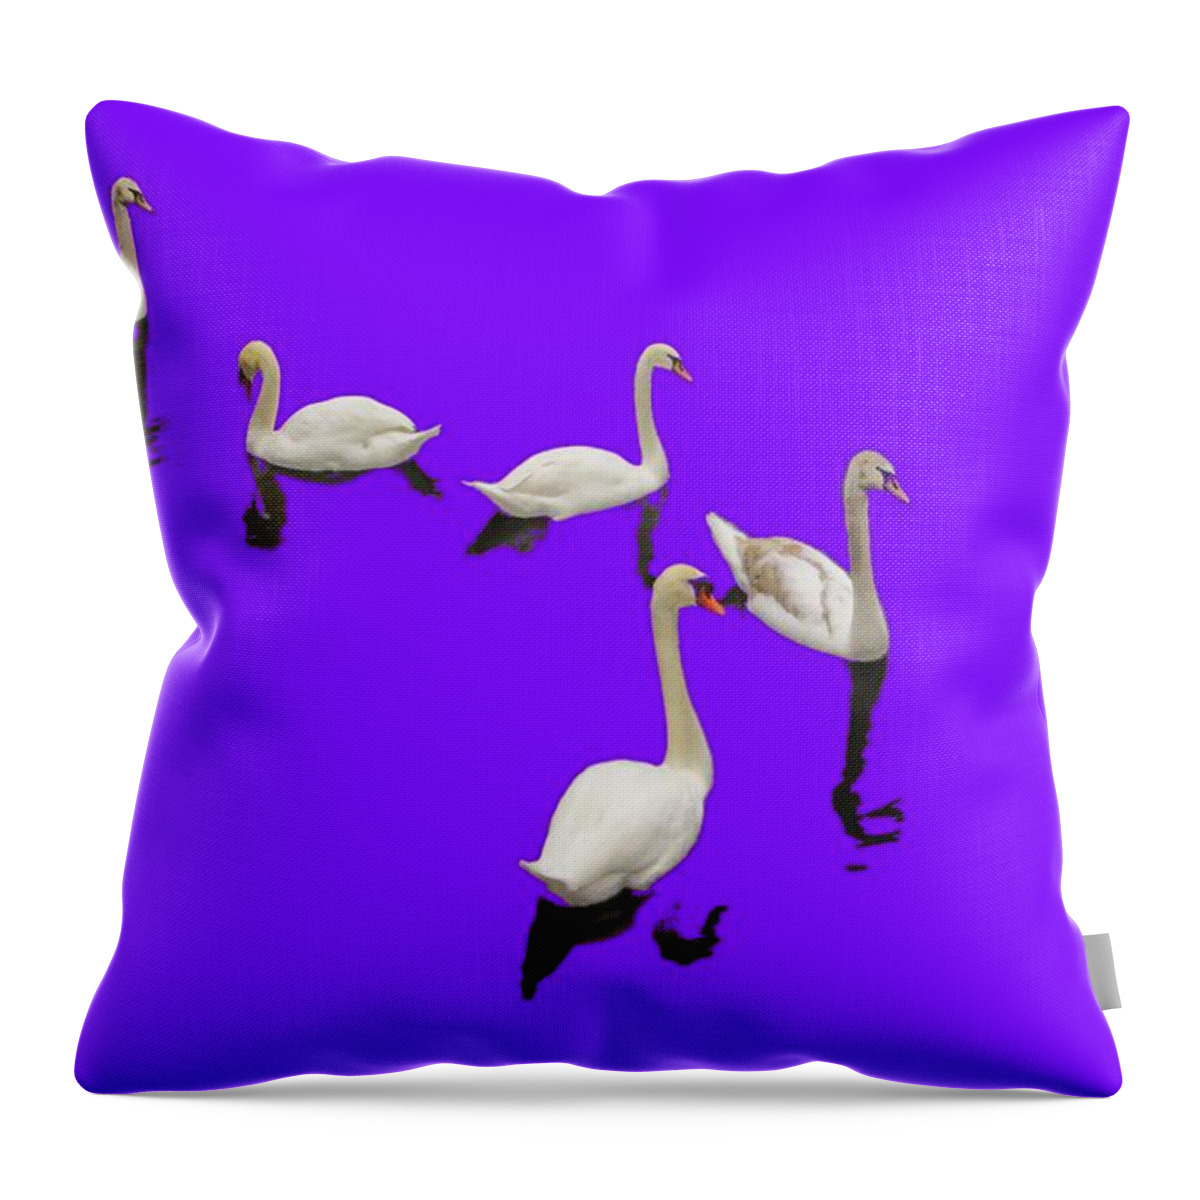 Background Purple Throw Pillow featuring the photograph Swan Family On Purple by Constantine Gregory